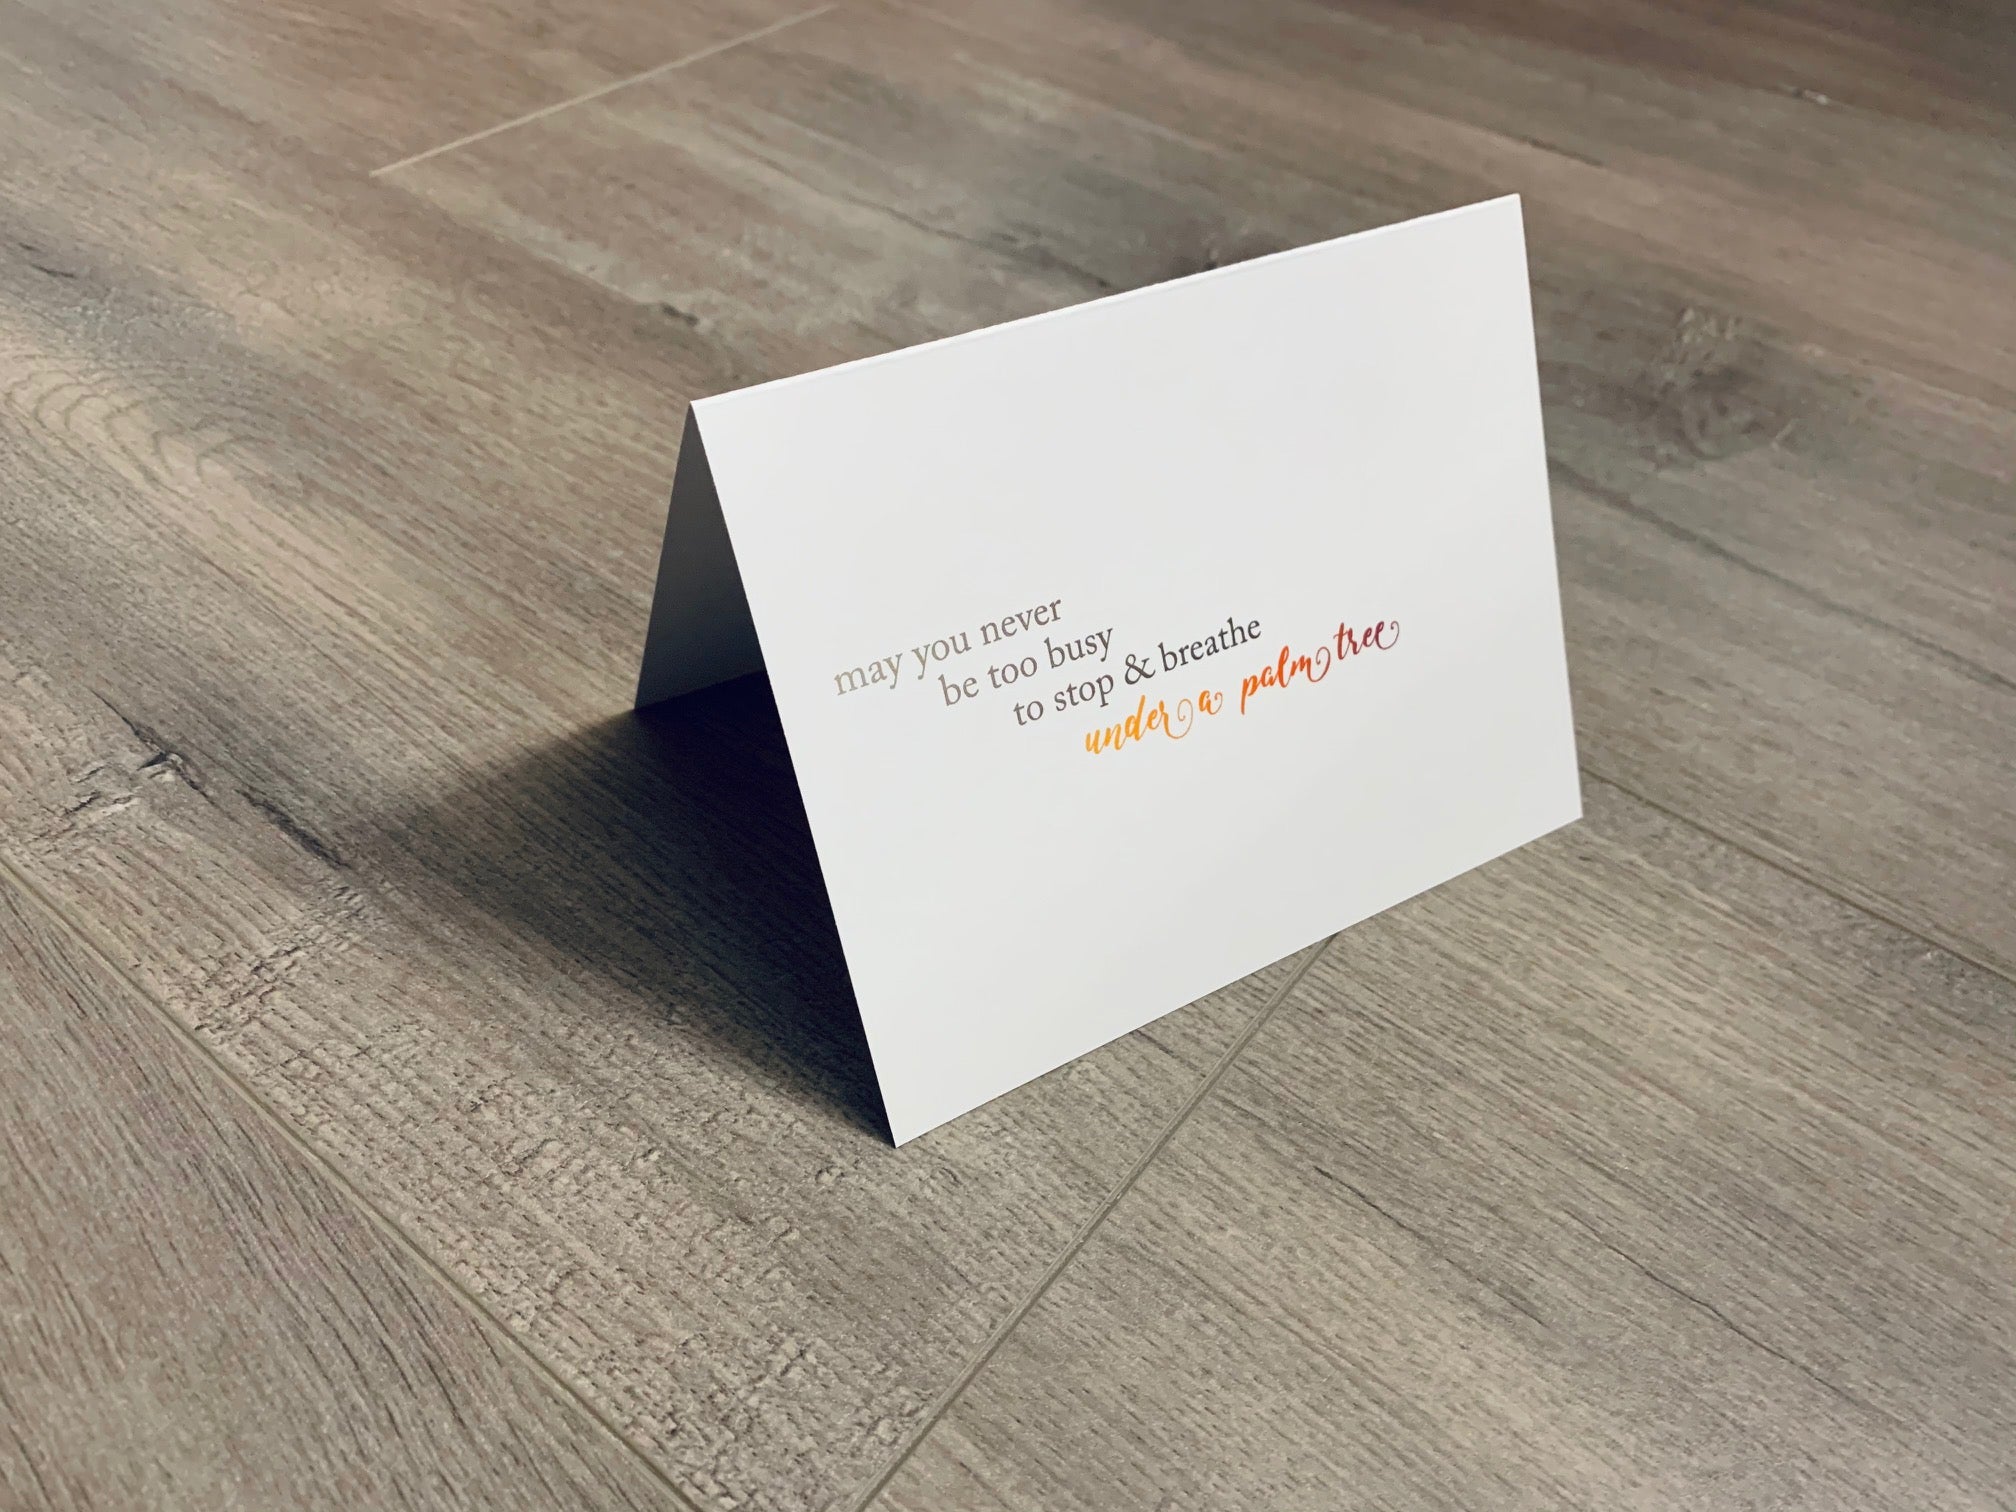 A white card is propped on a gray wood floor. The card reads, "May you never be too busy to stop and breathe under a palm tree." Beach Life Collection by Stationare.